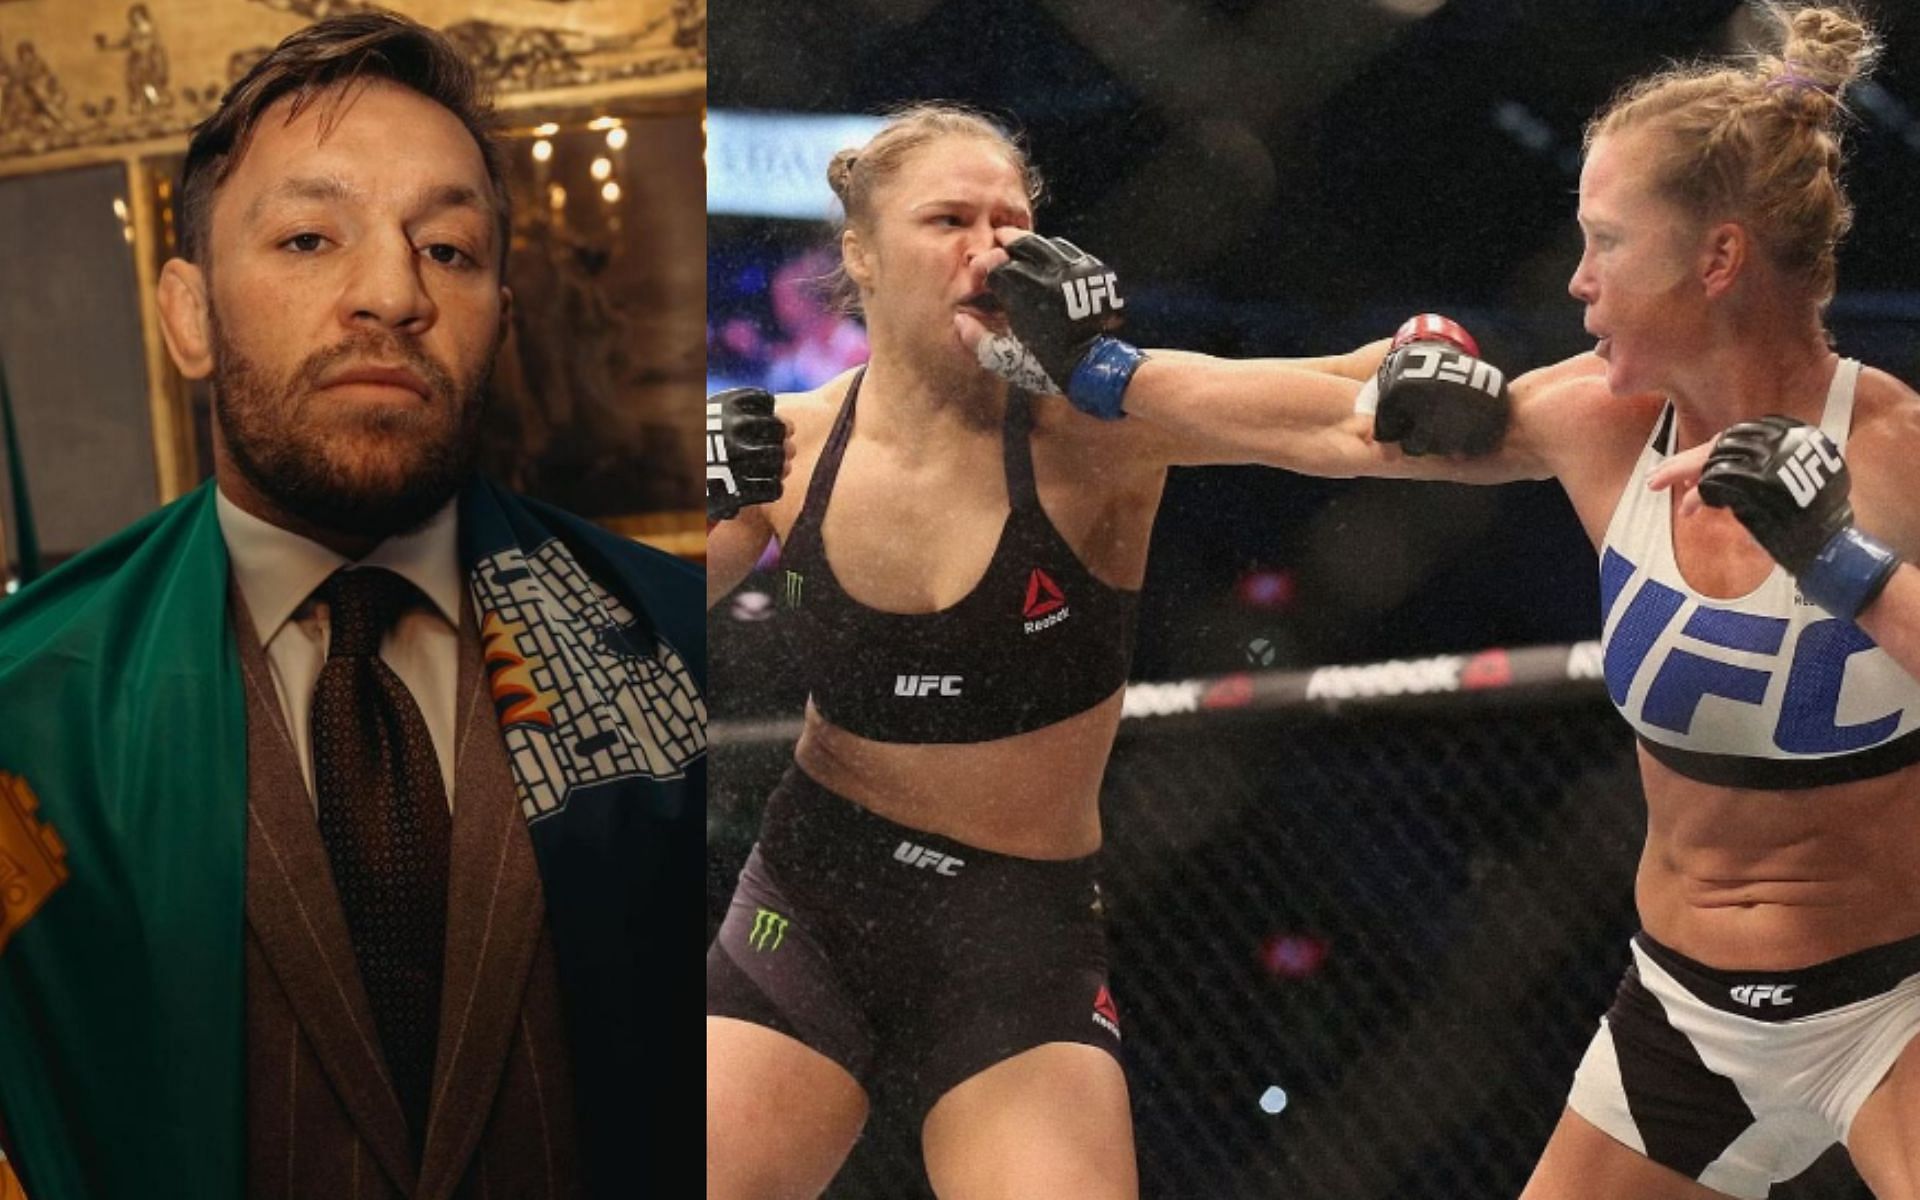 Conor McGregor (left) weighs in on Holly Holm and Ronda Rousey